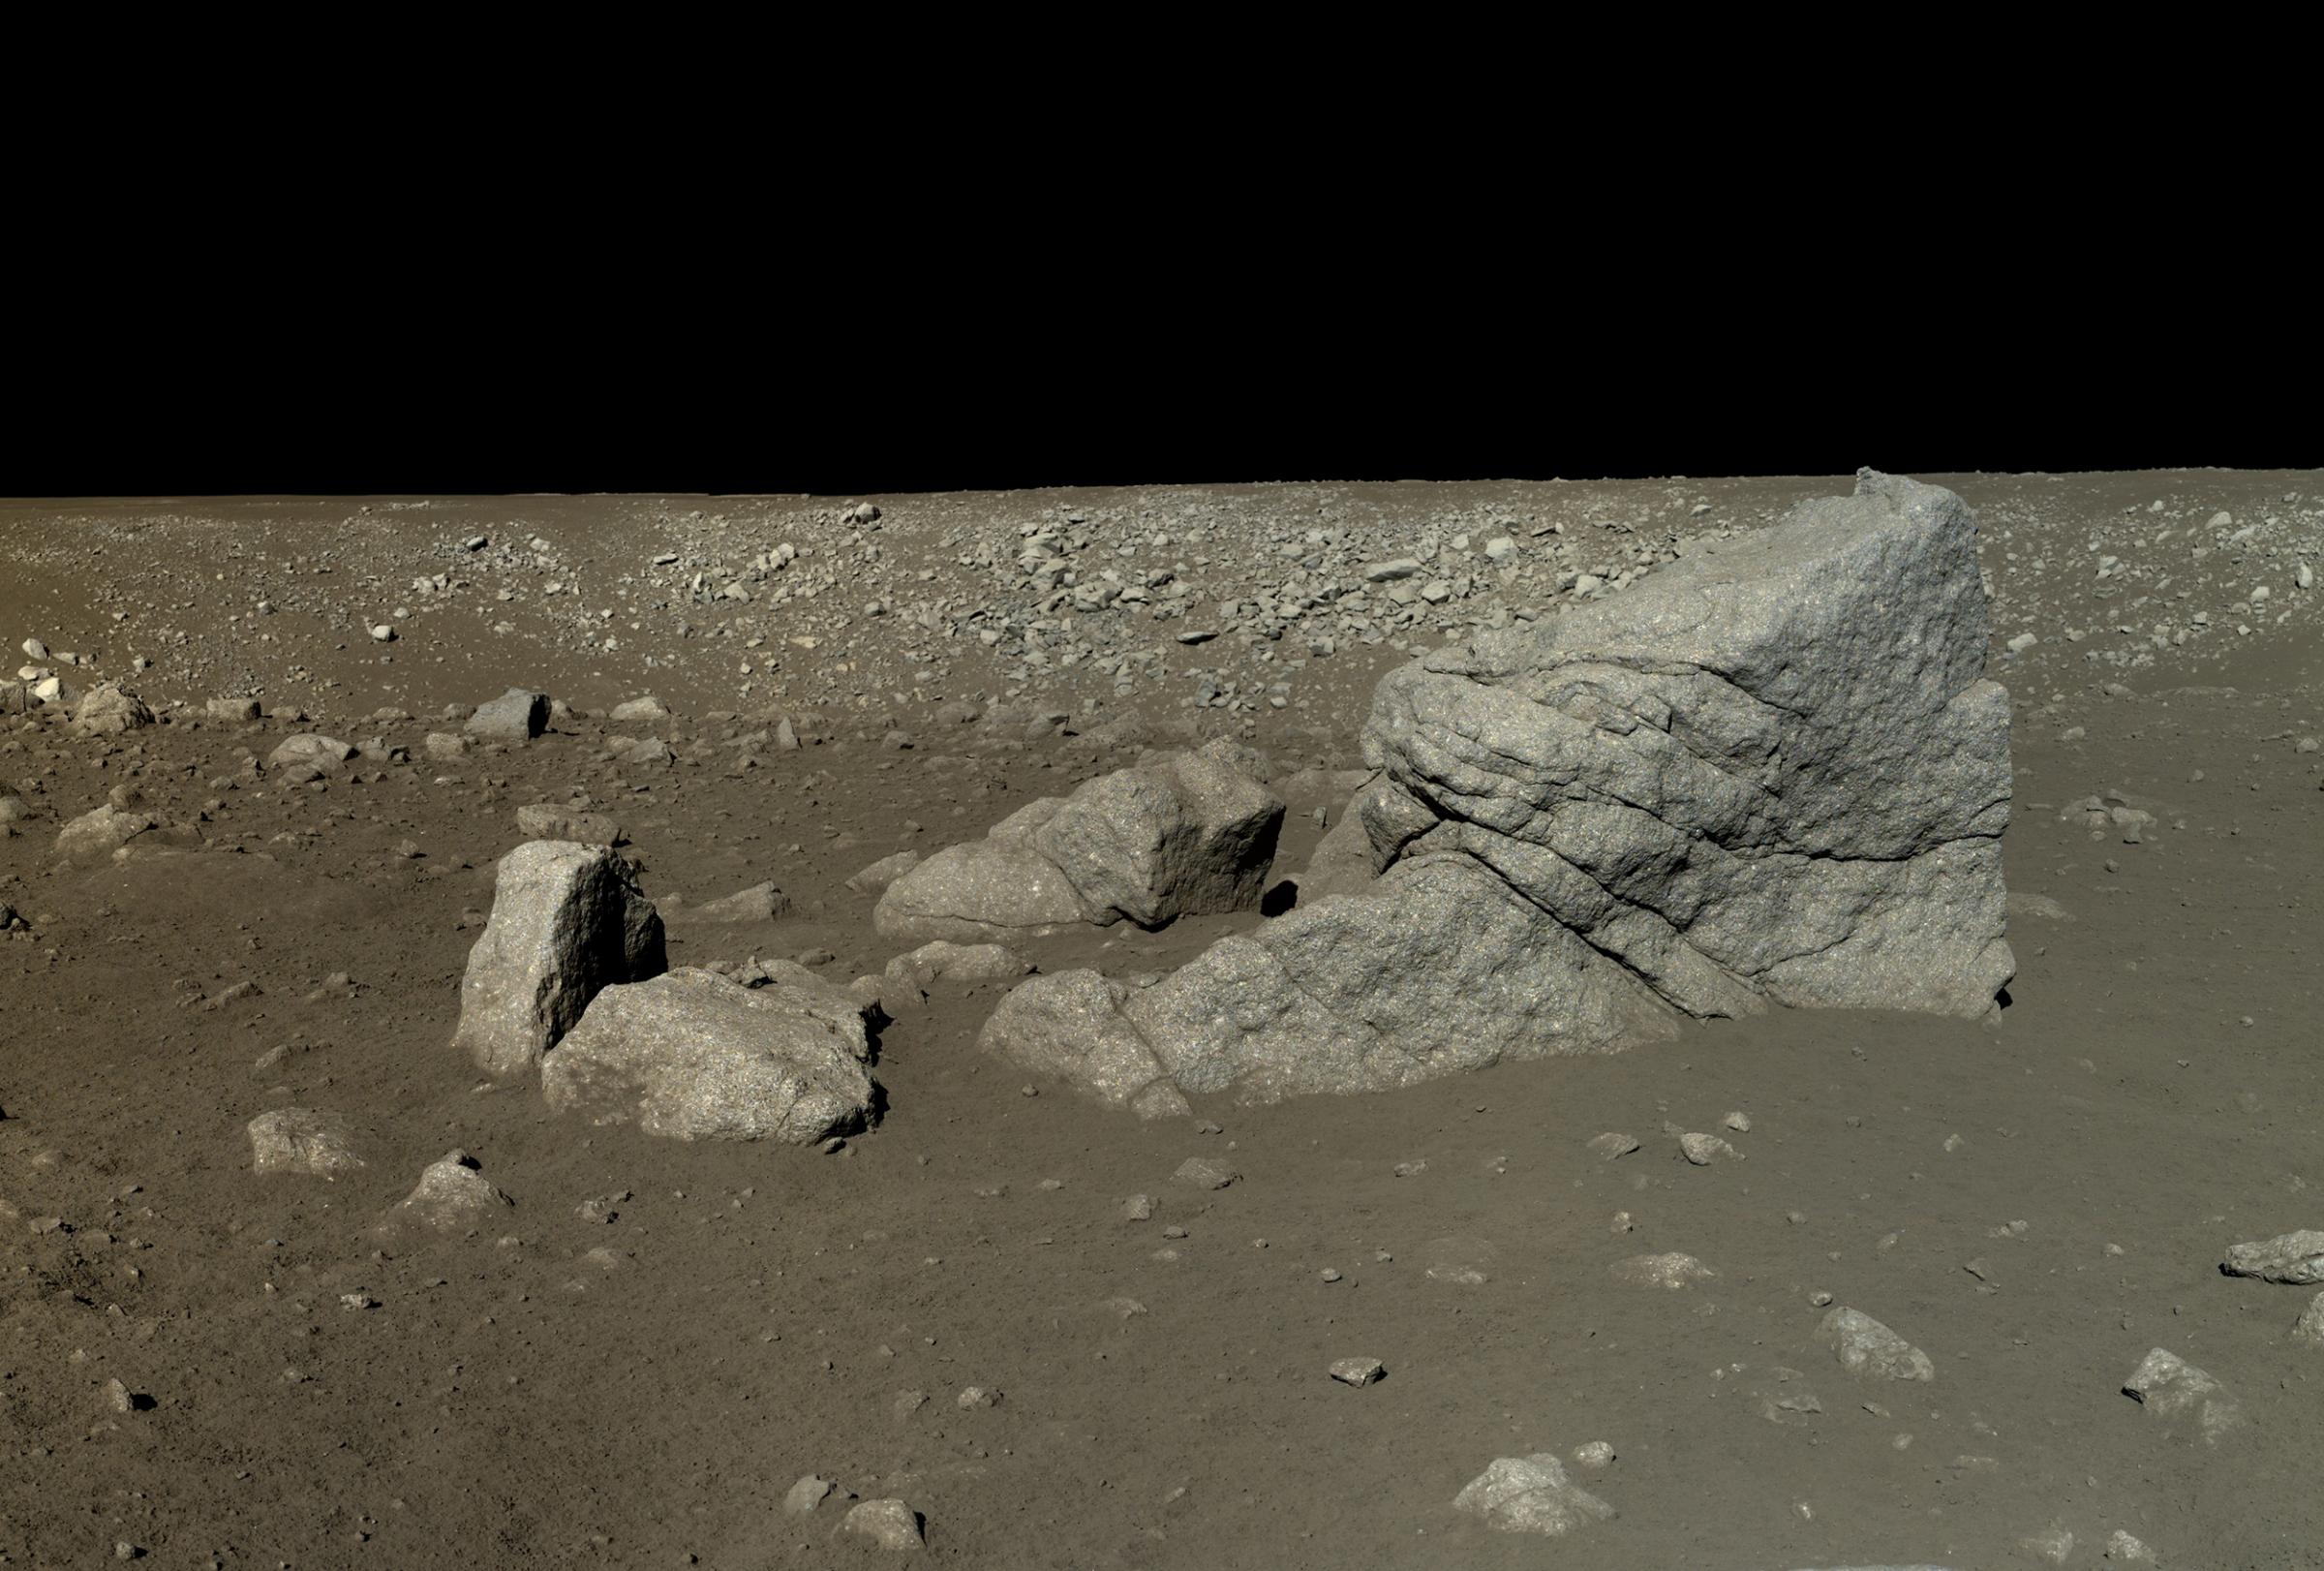 This is a mosaic of six images captured by the Yutu rover on Jan. 13, 2014, after it had driven southwest of the lander to visit a large block of impact ejecta that the team named Long Yan (Pyramid Rock).